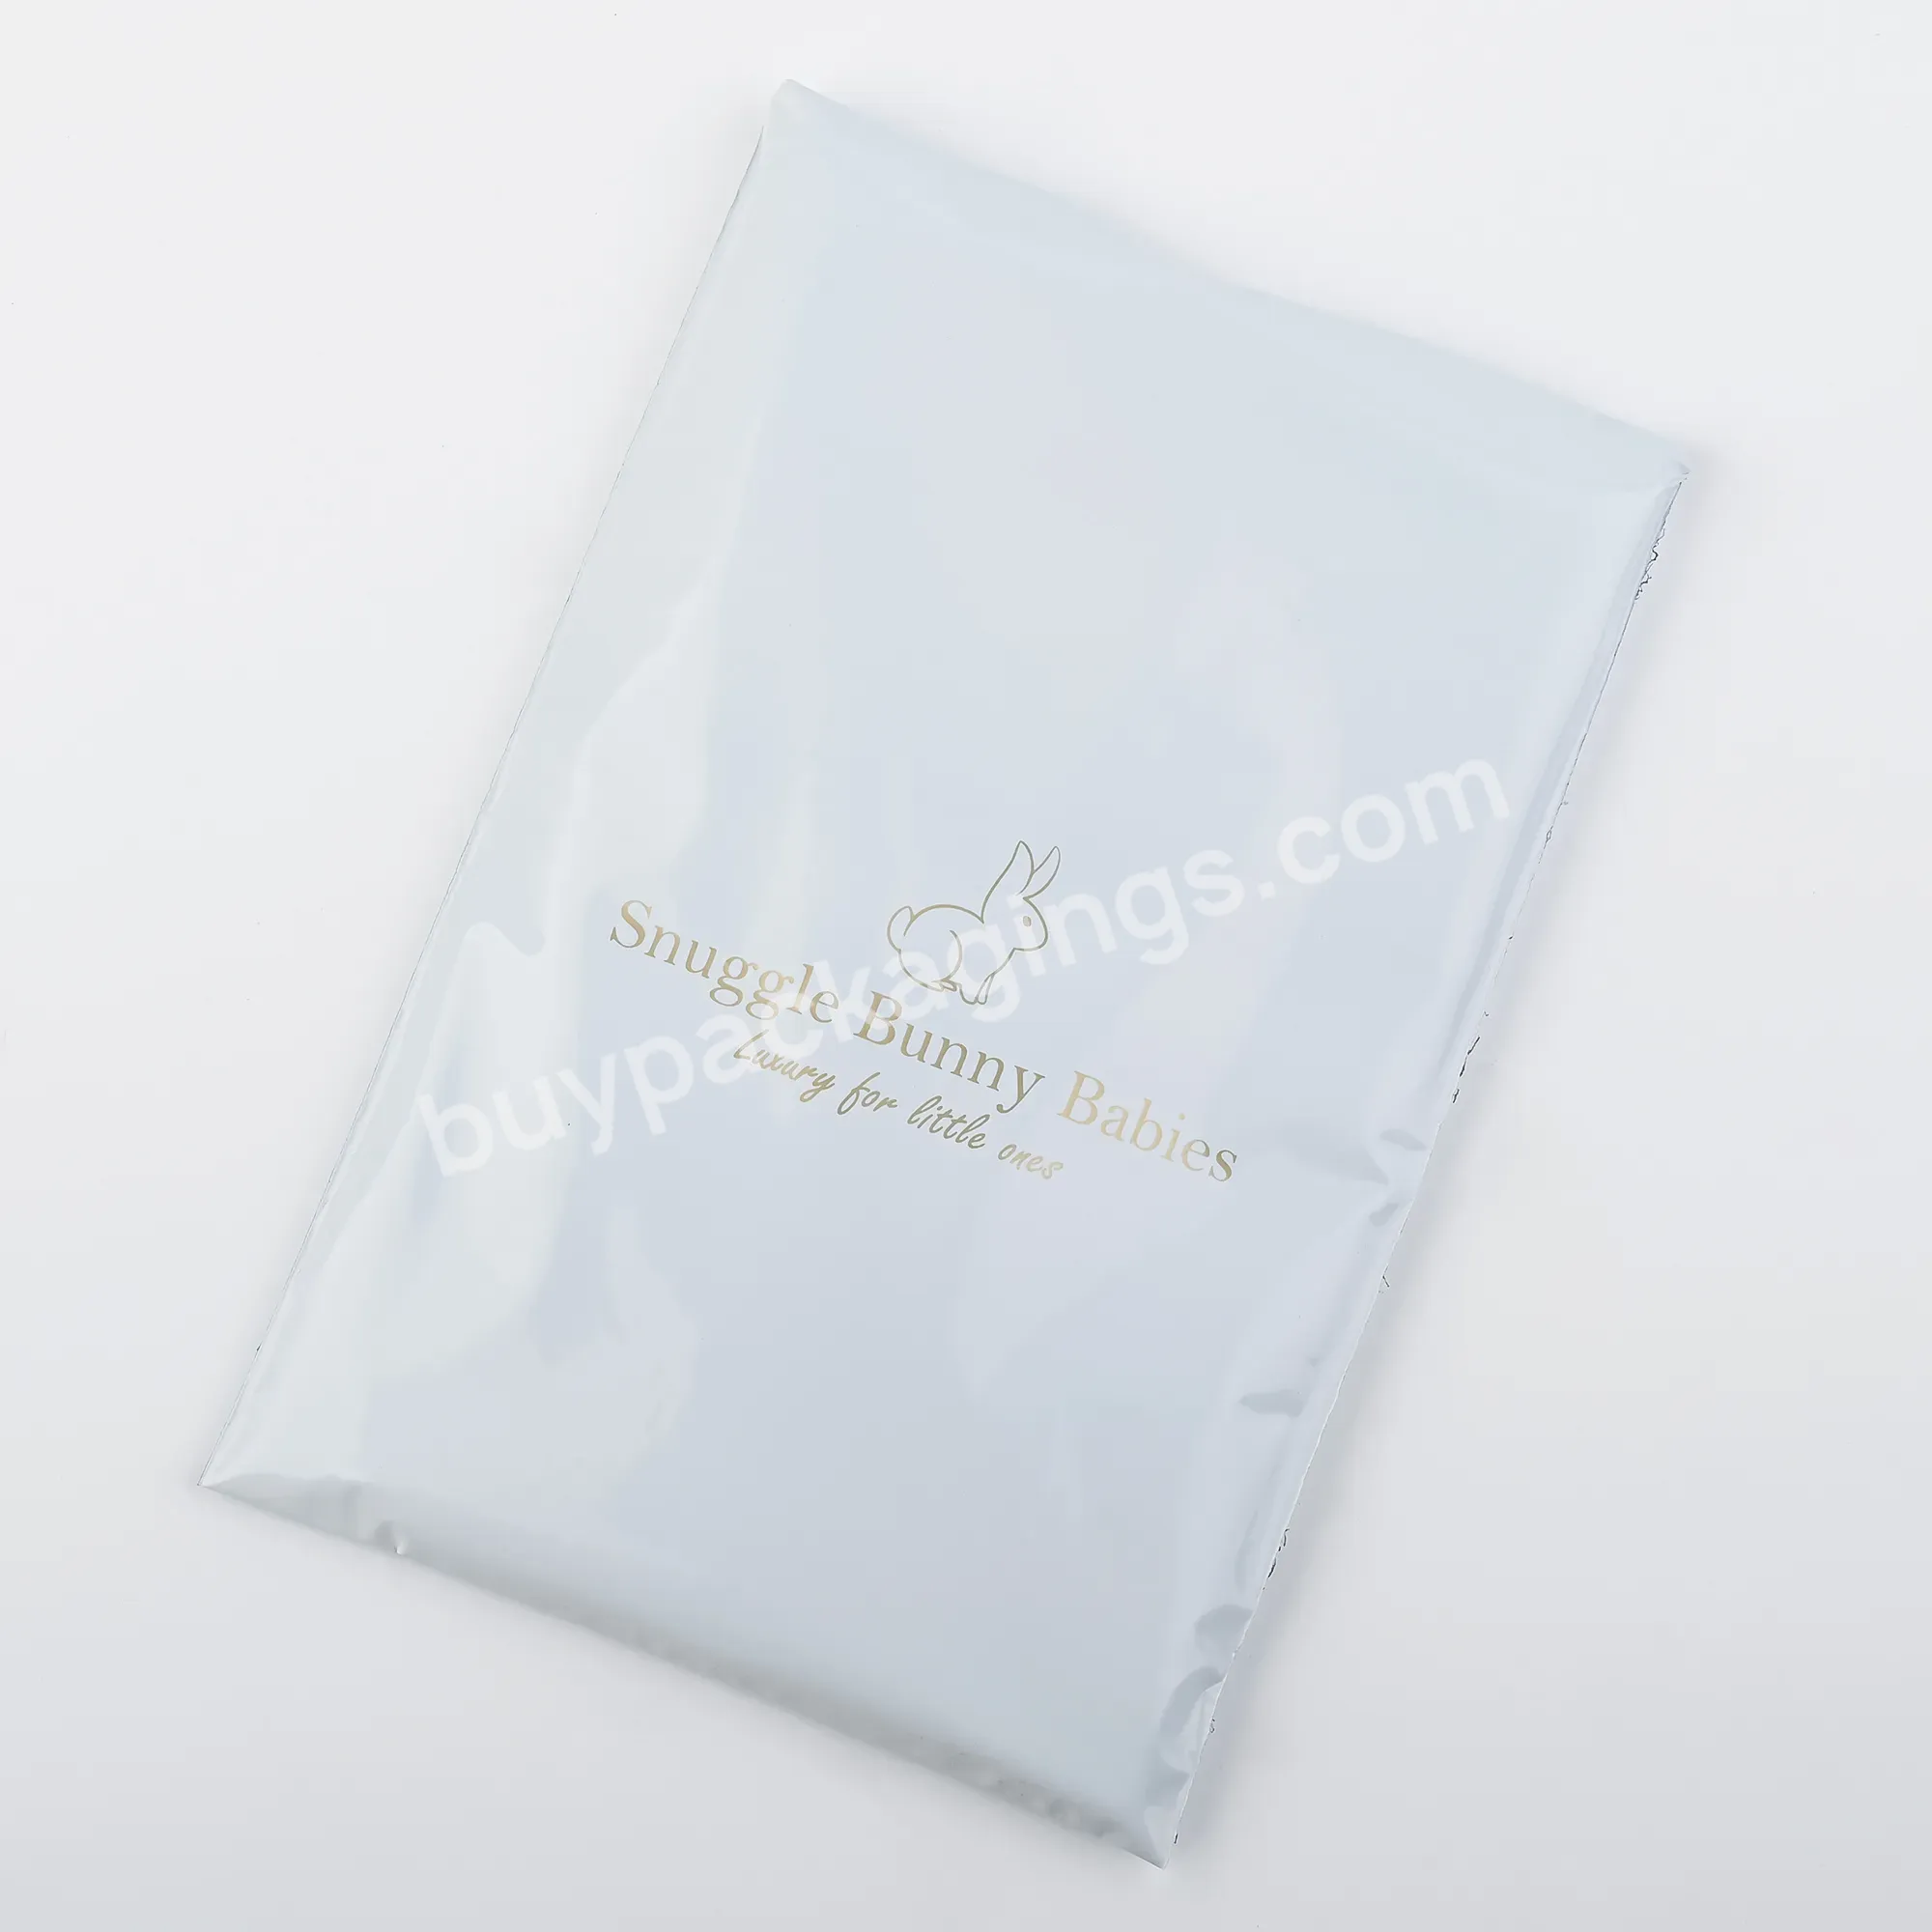 Compostable Mailer Recycled Polymailer Eco Mailer Bag Shipping Bags Packaging Bags For Shipping